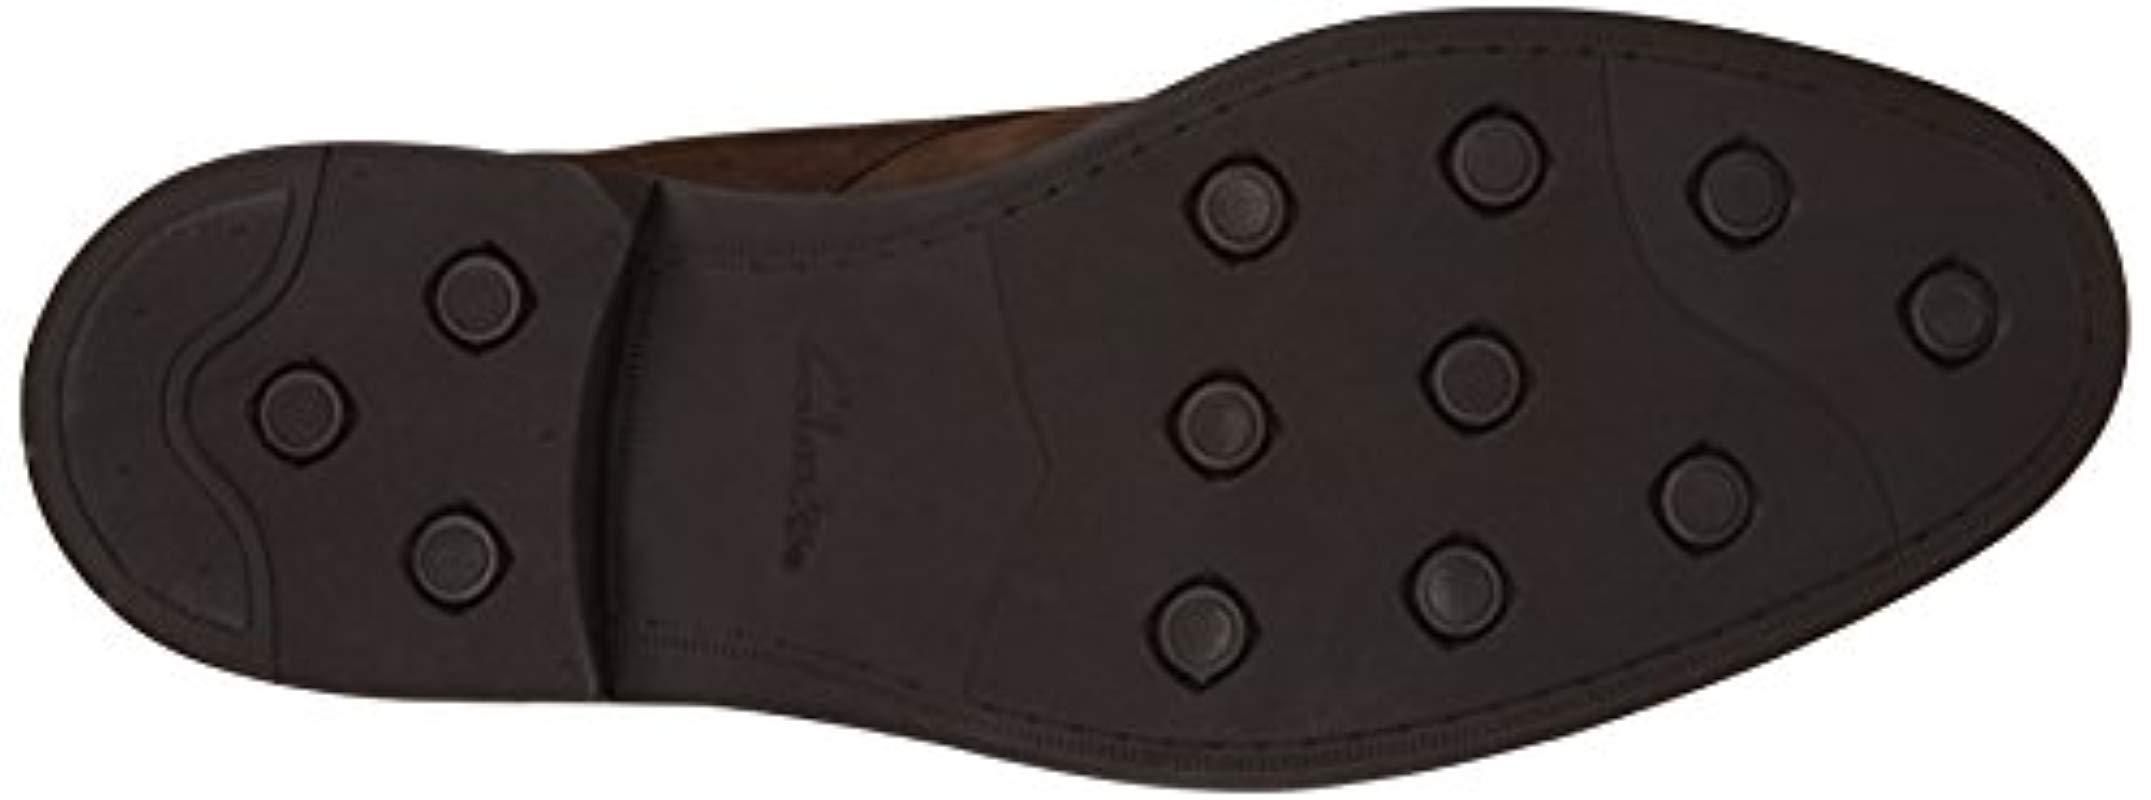 Clarks Leather Chilver Hi Gtx Ankle Boots in Brown Dark Brown Nubuck  (Brown) for Men - Save 14% | Lyst UK